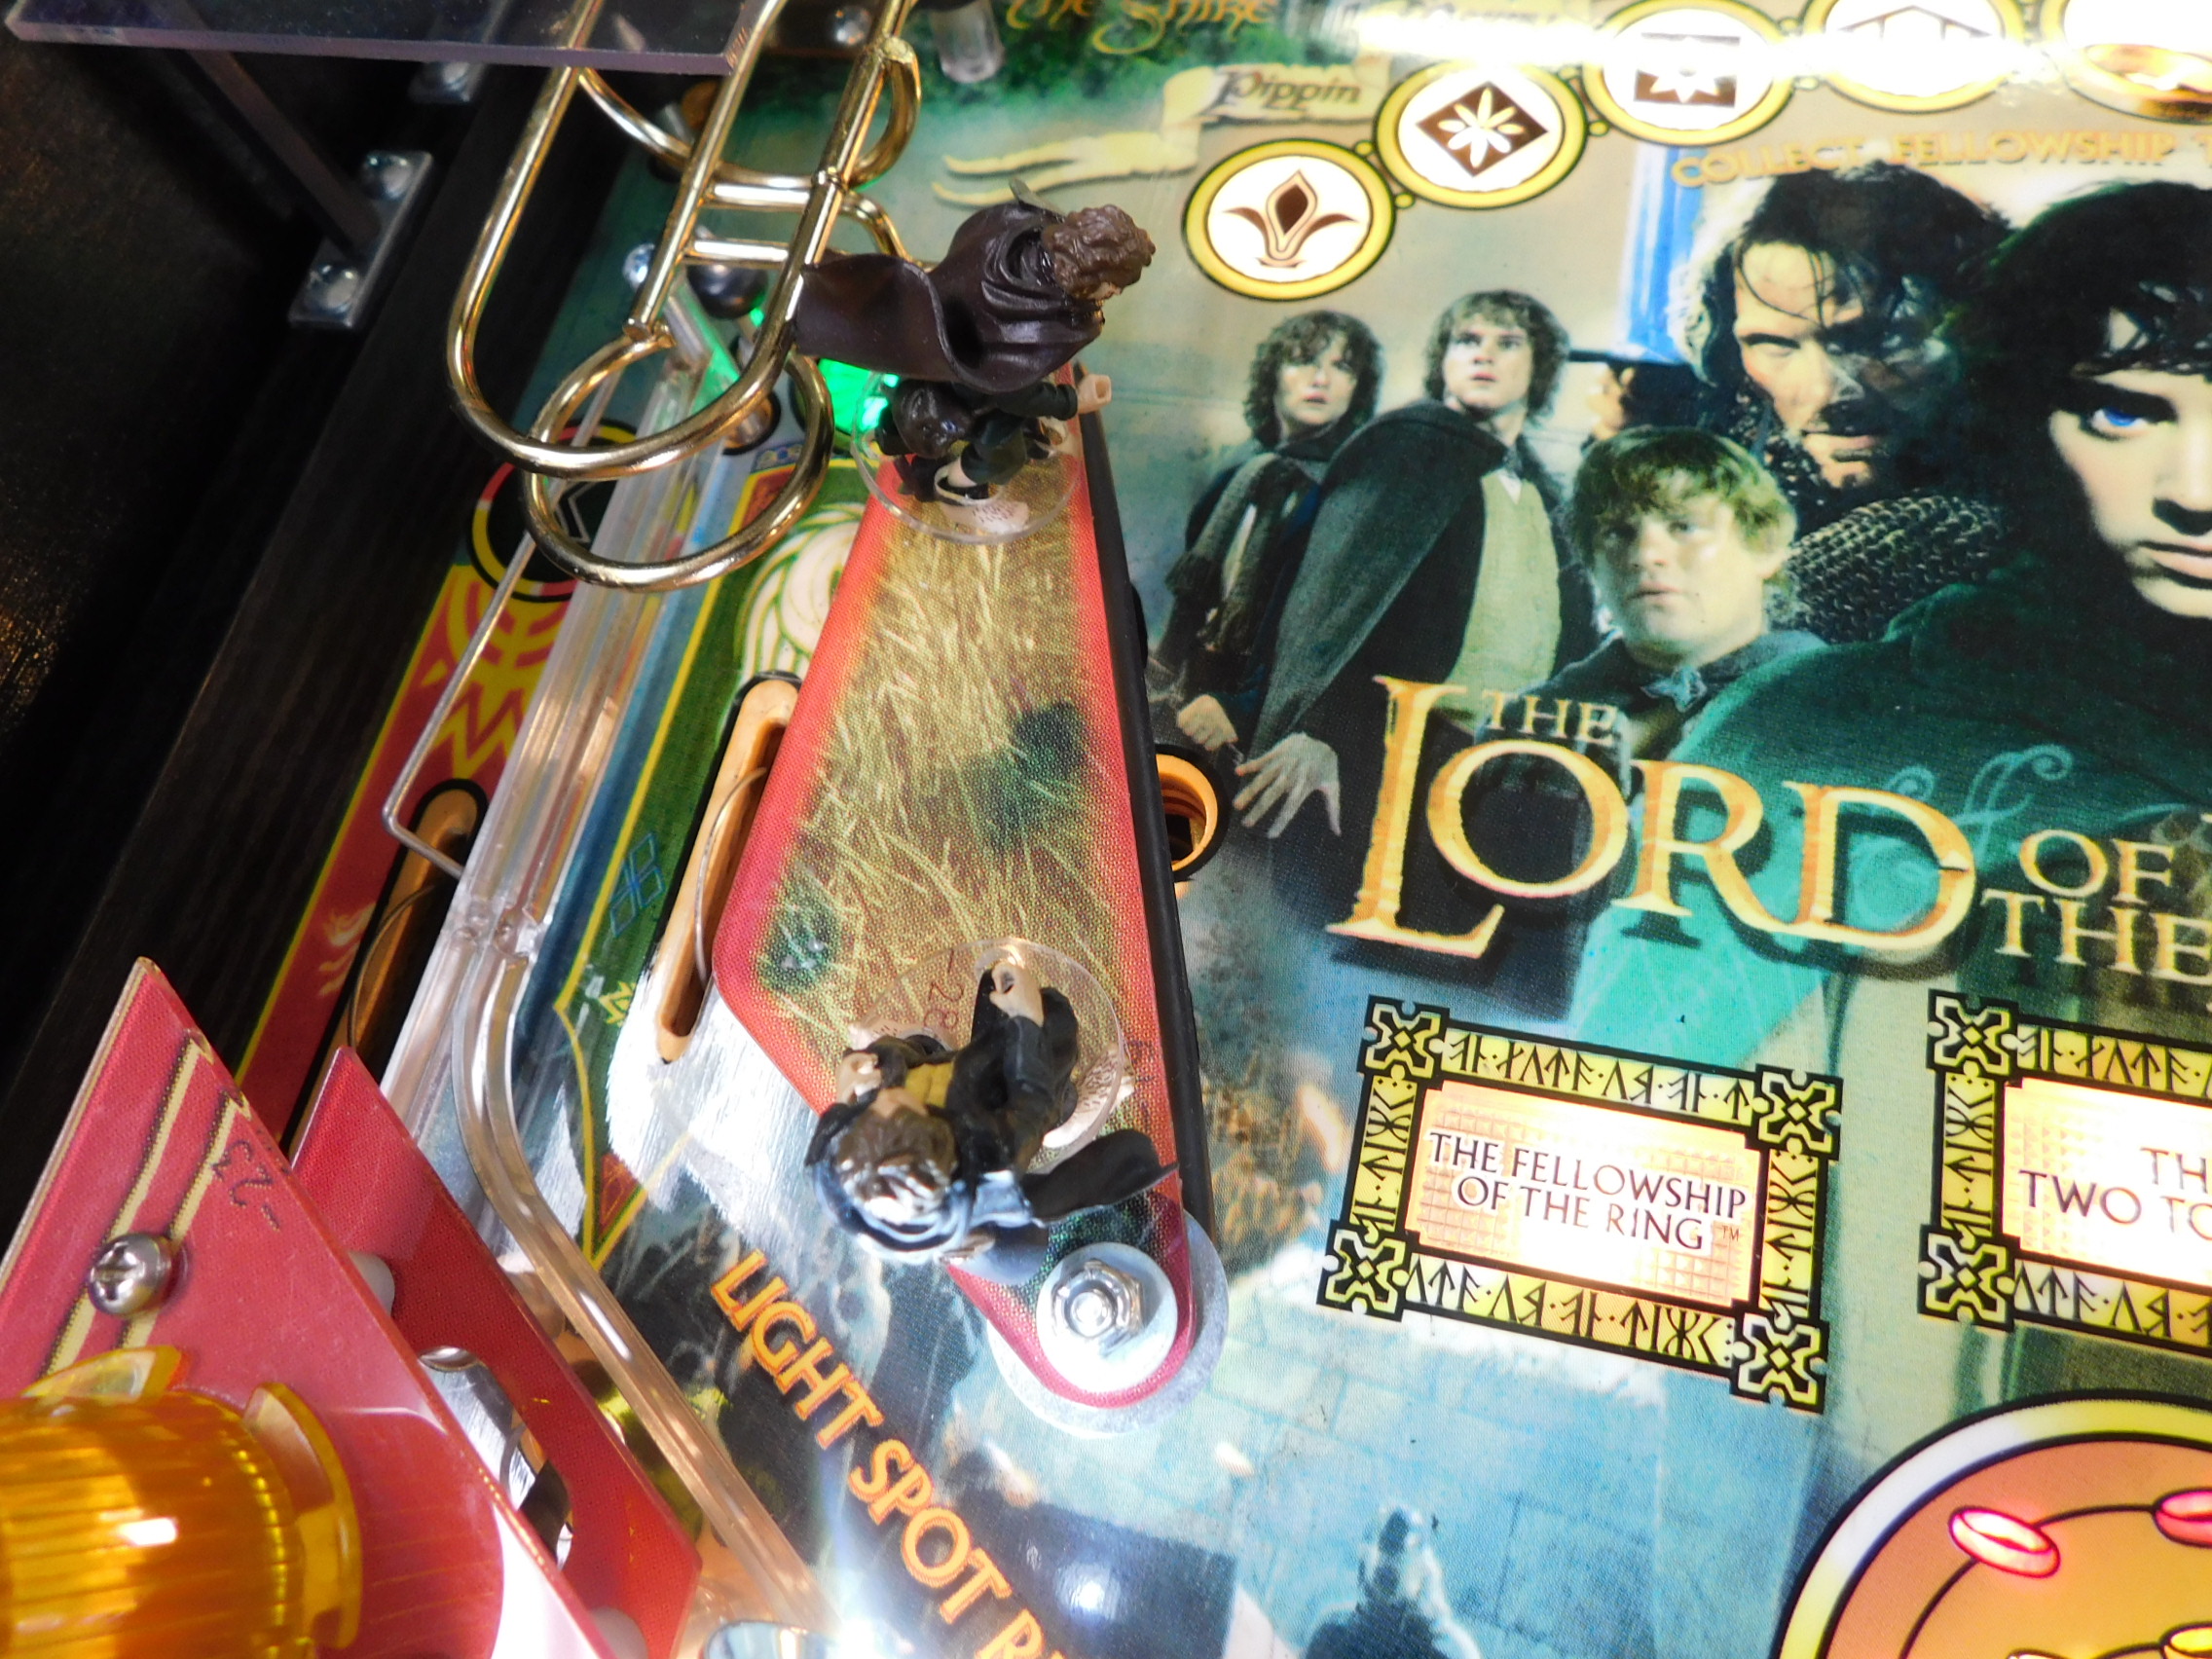 Stern Lord of the Rings